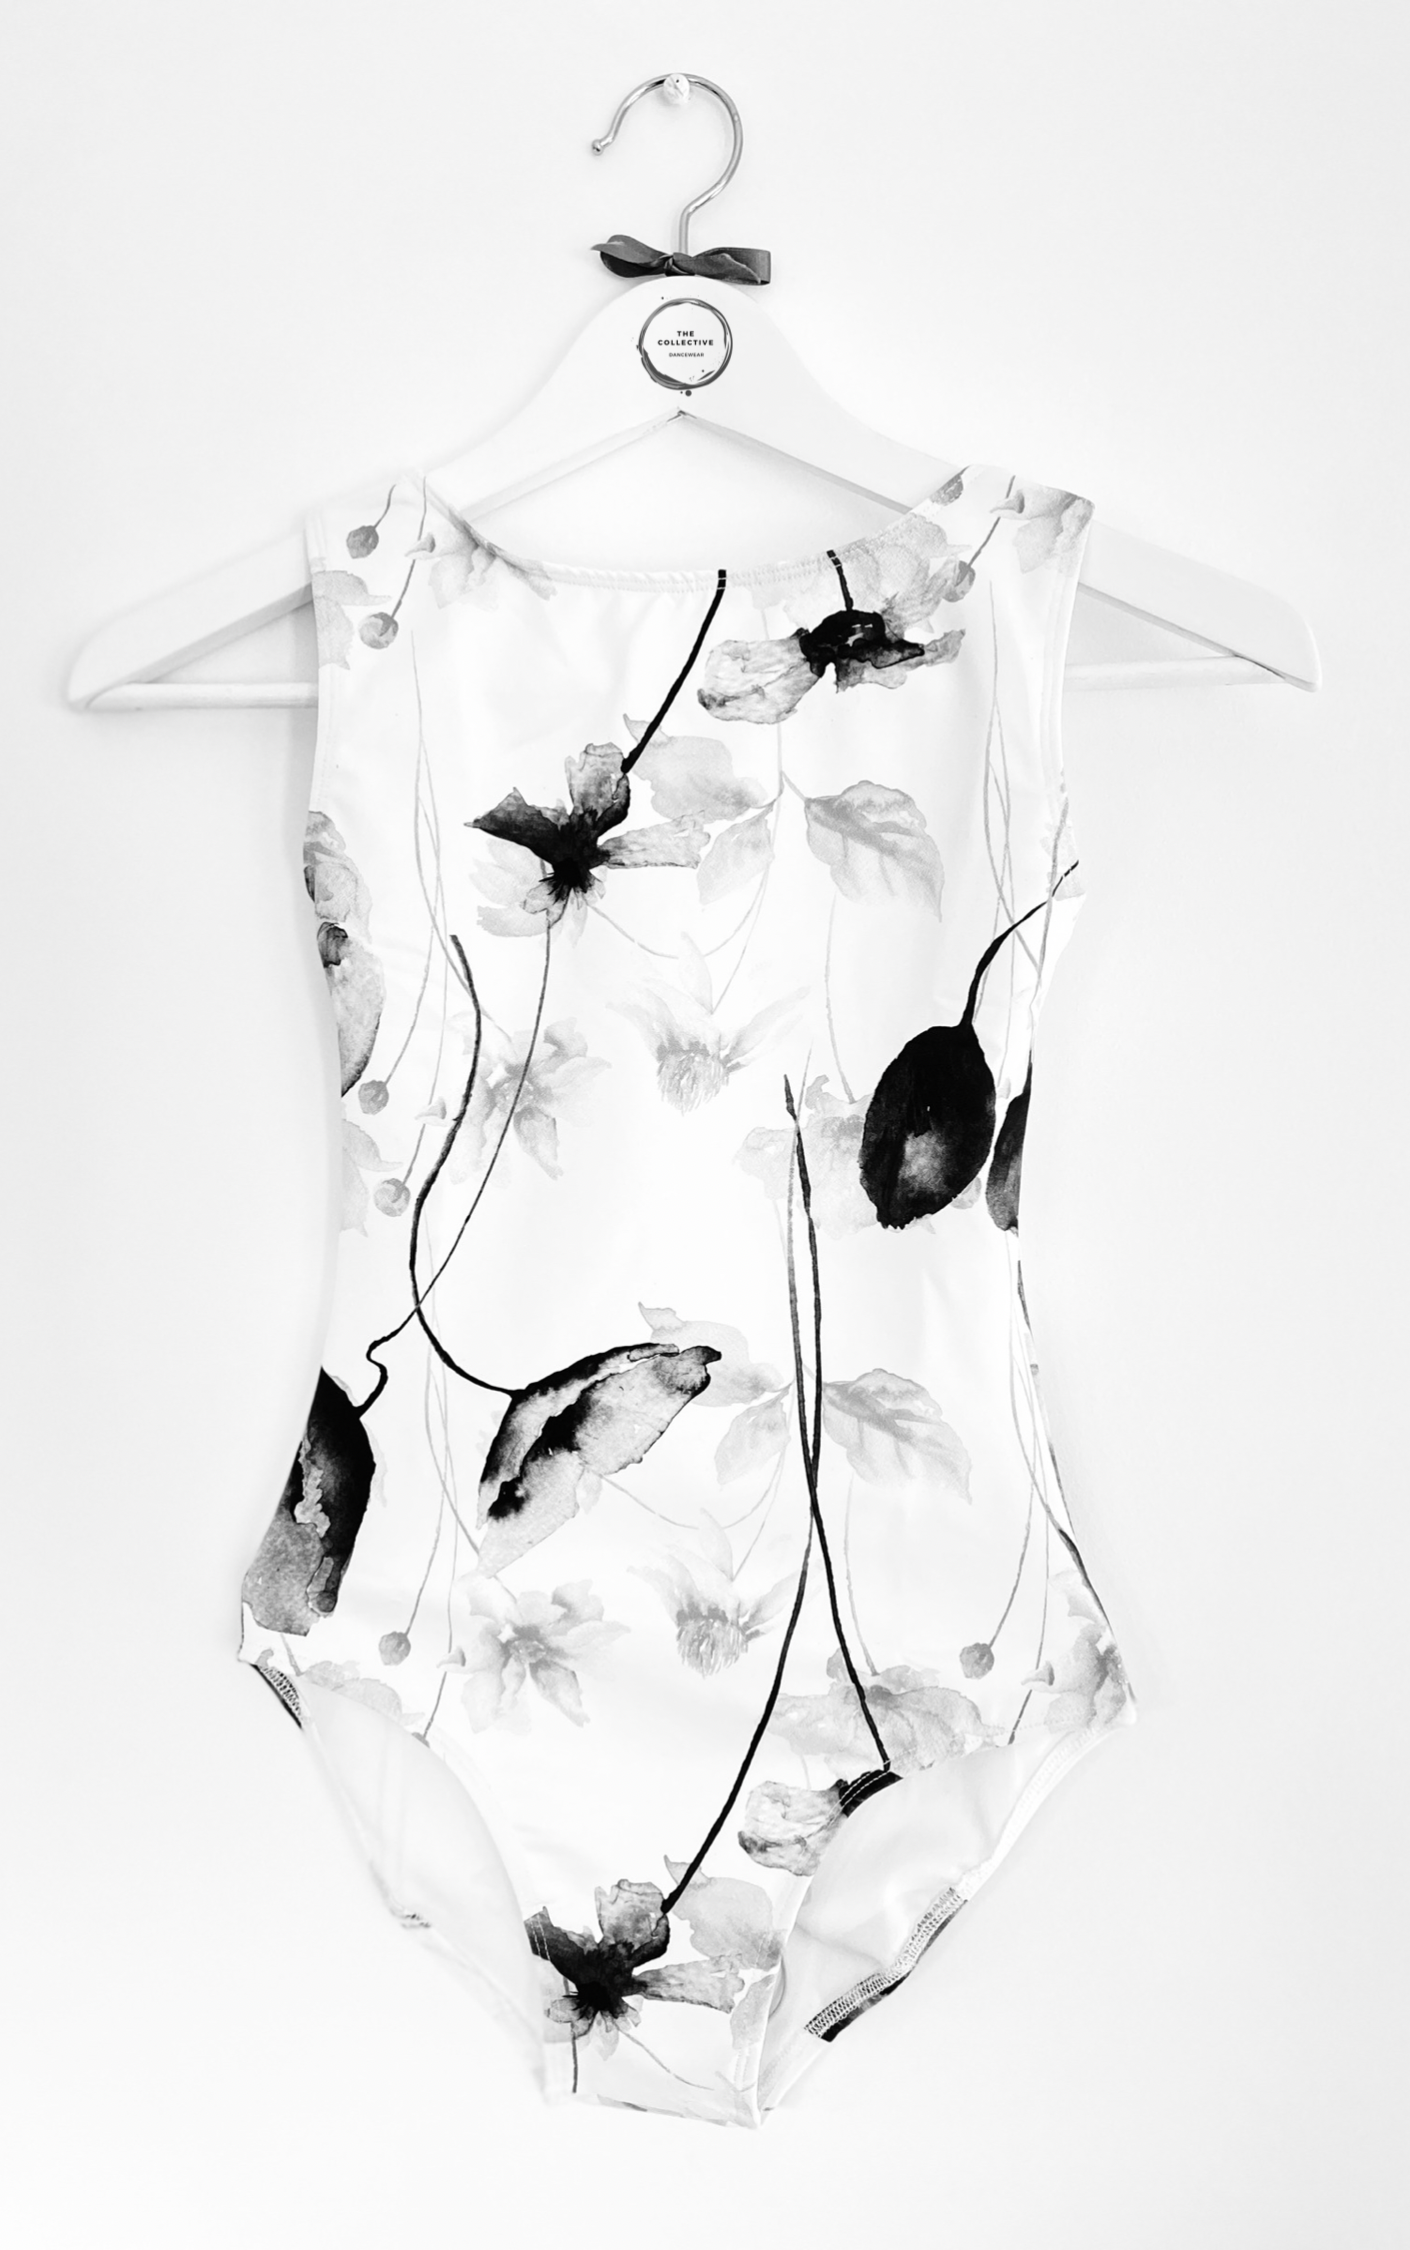 Sleeveless tank leotard with monochrome poppy pattern on white body from The Collective Dancewear